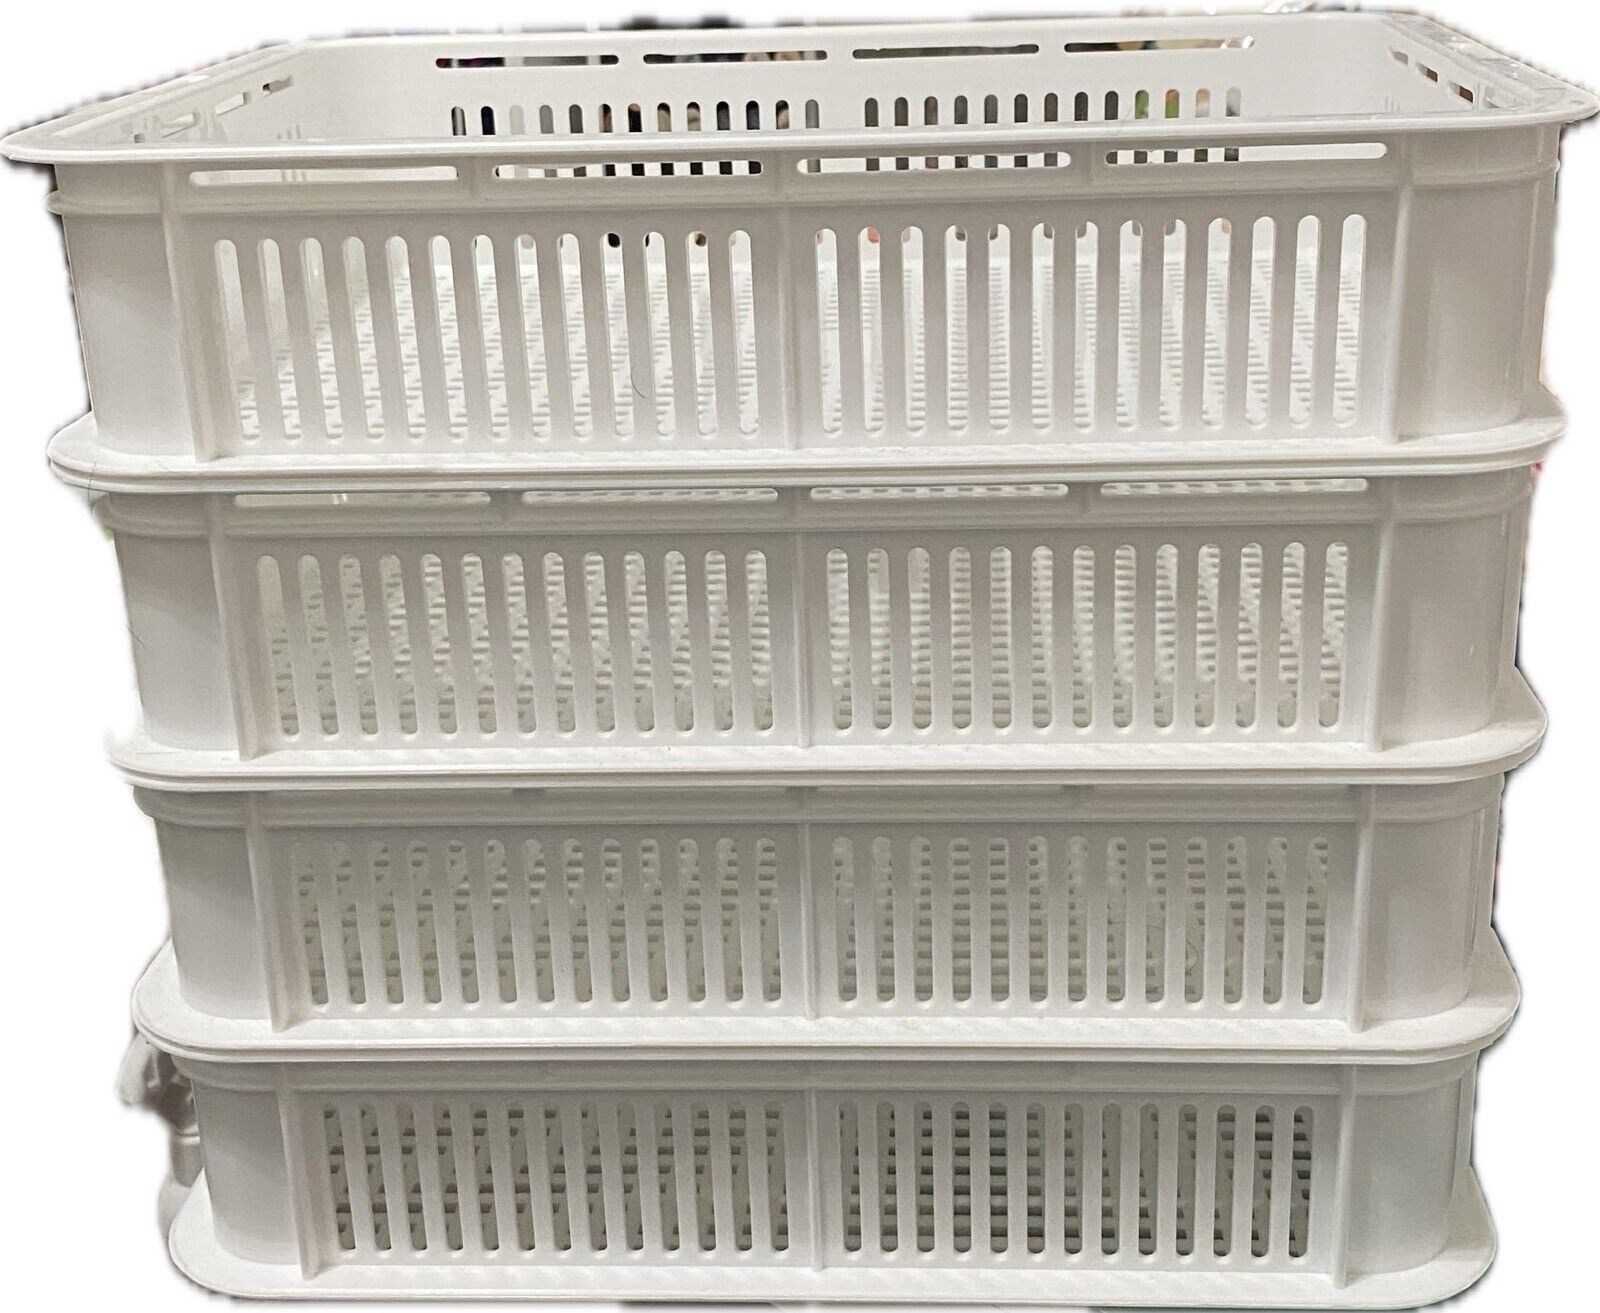 Daiso Japan Stackable Baskets Set of 4